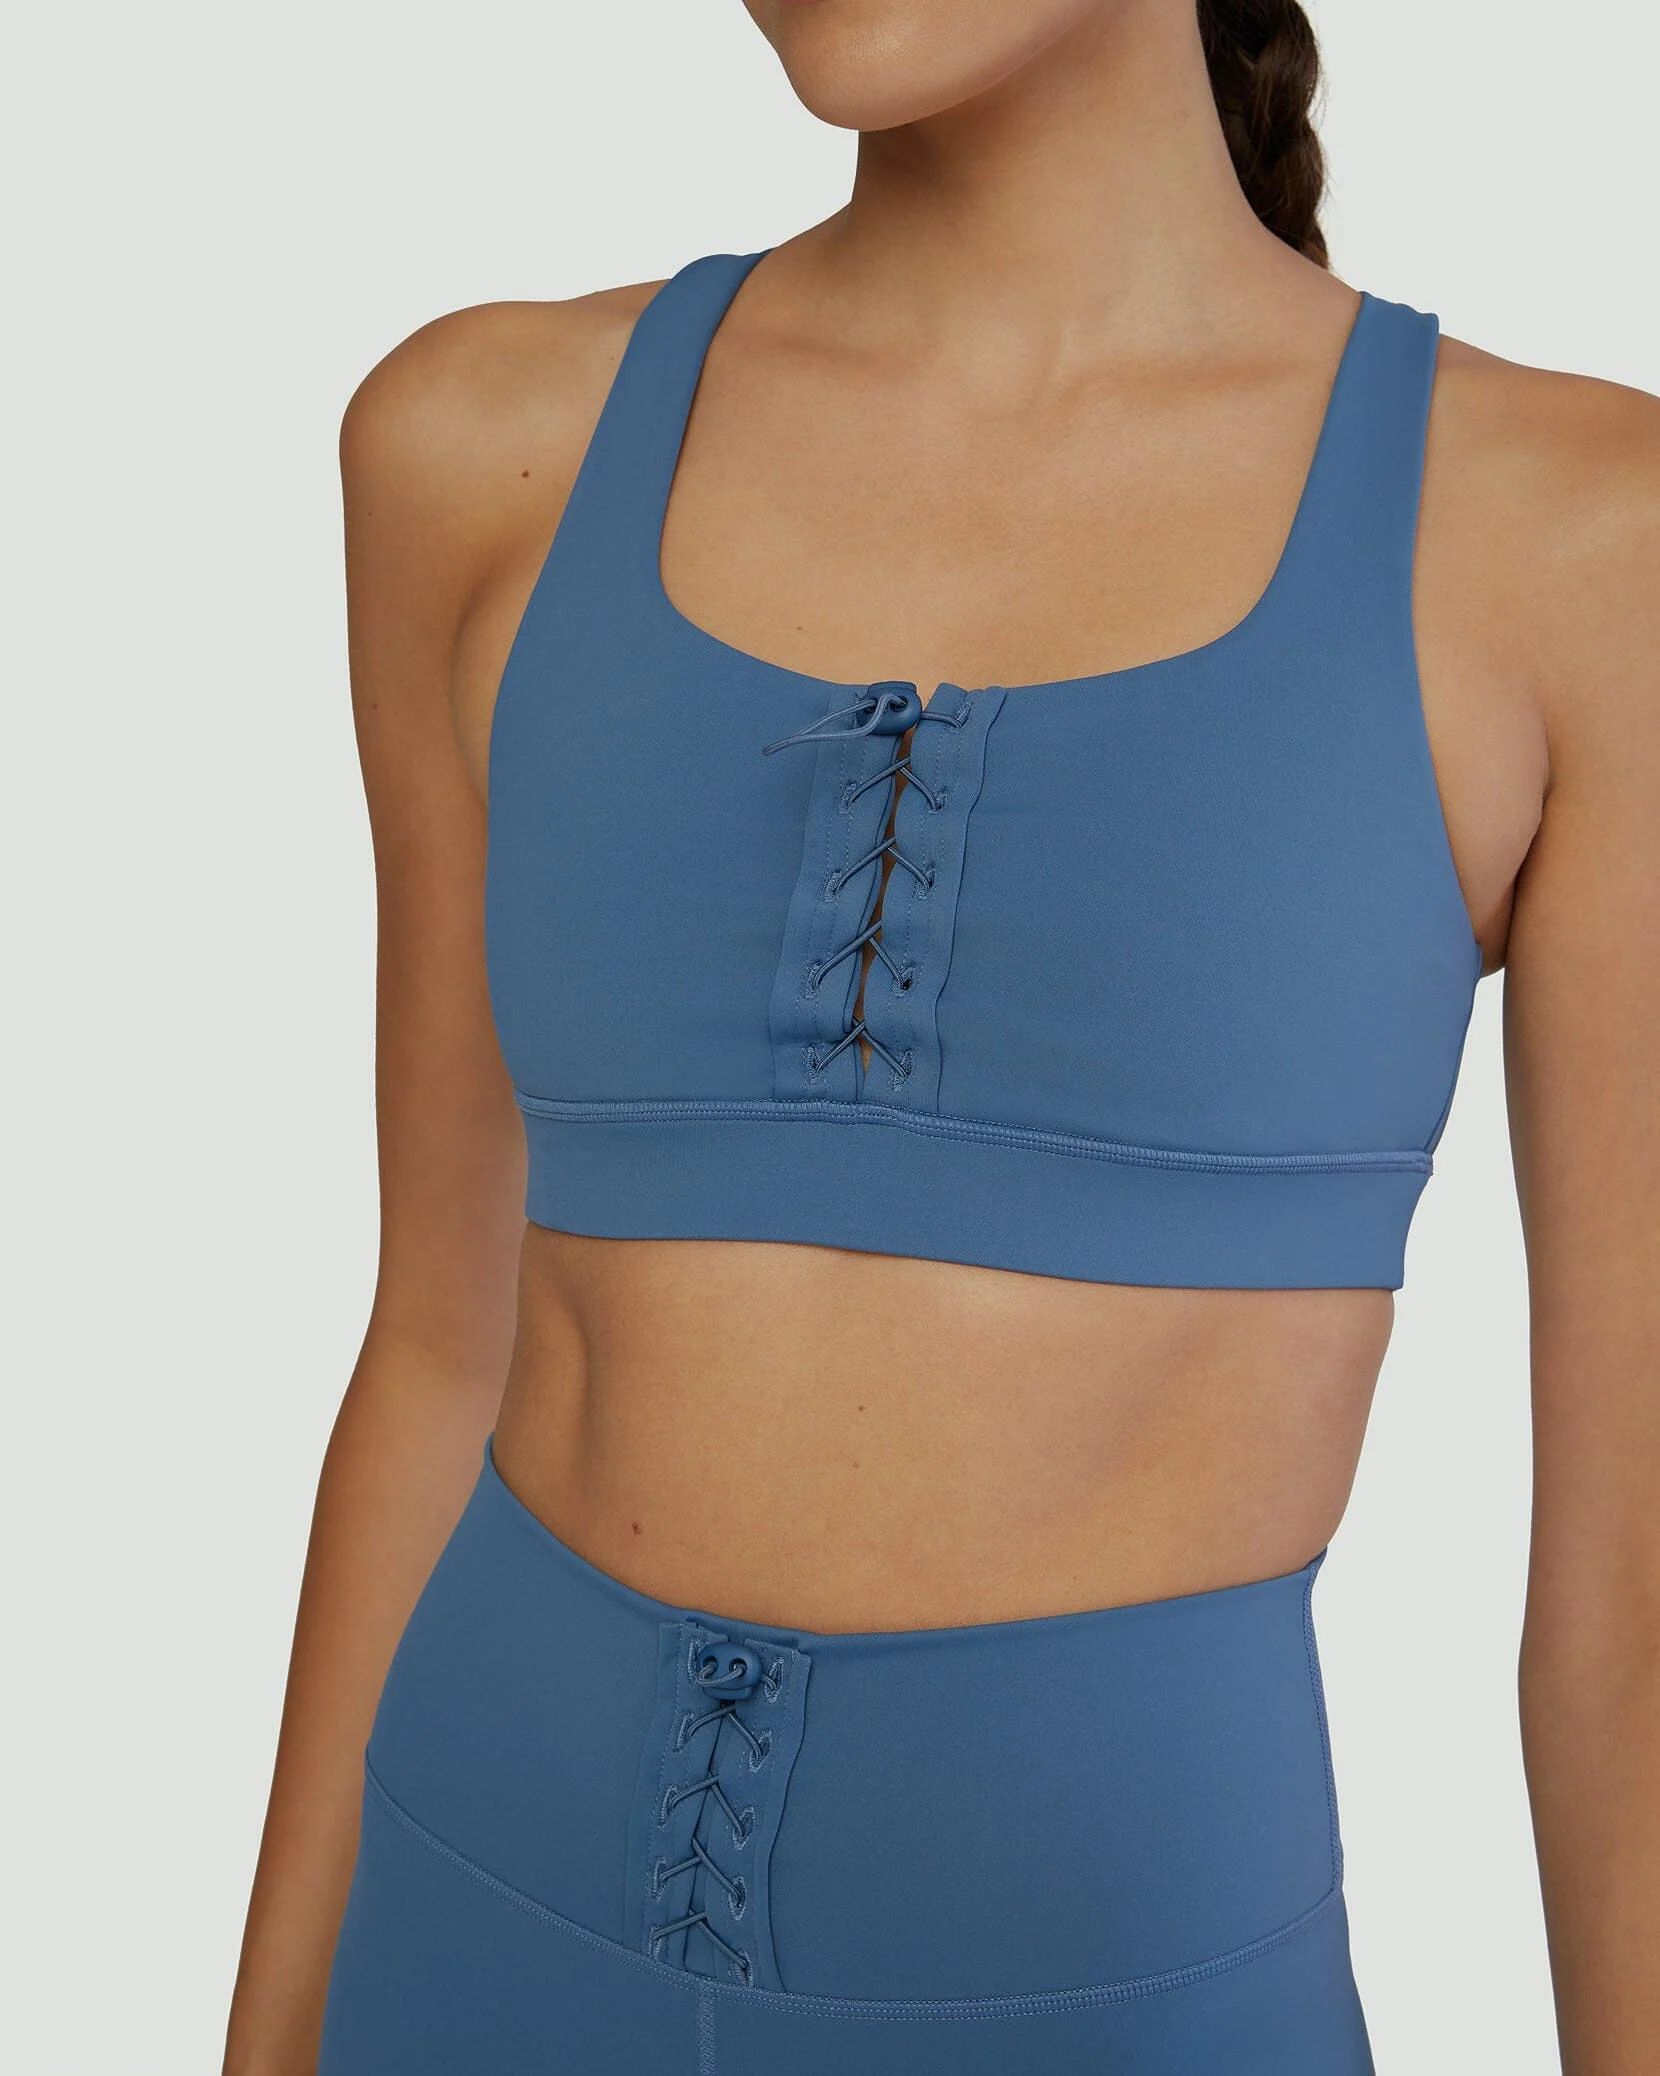 Lace Up Bra | IVL COLLECTIVE